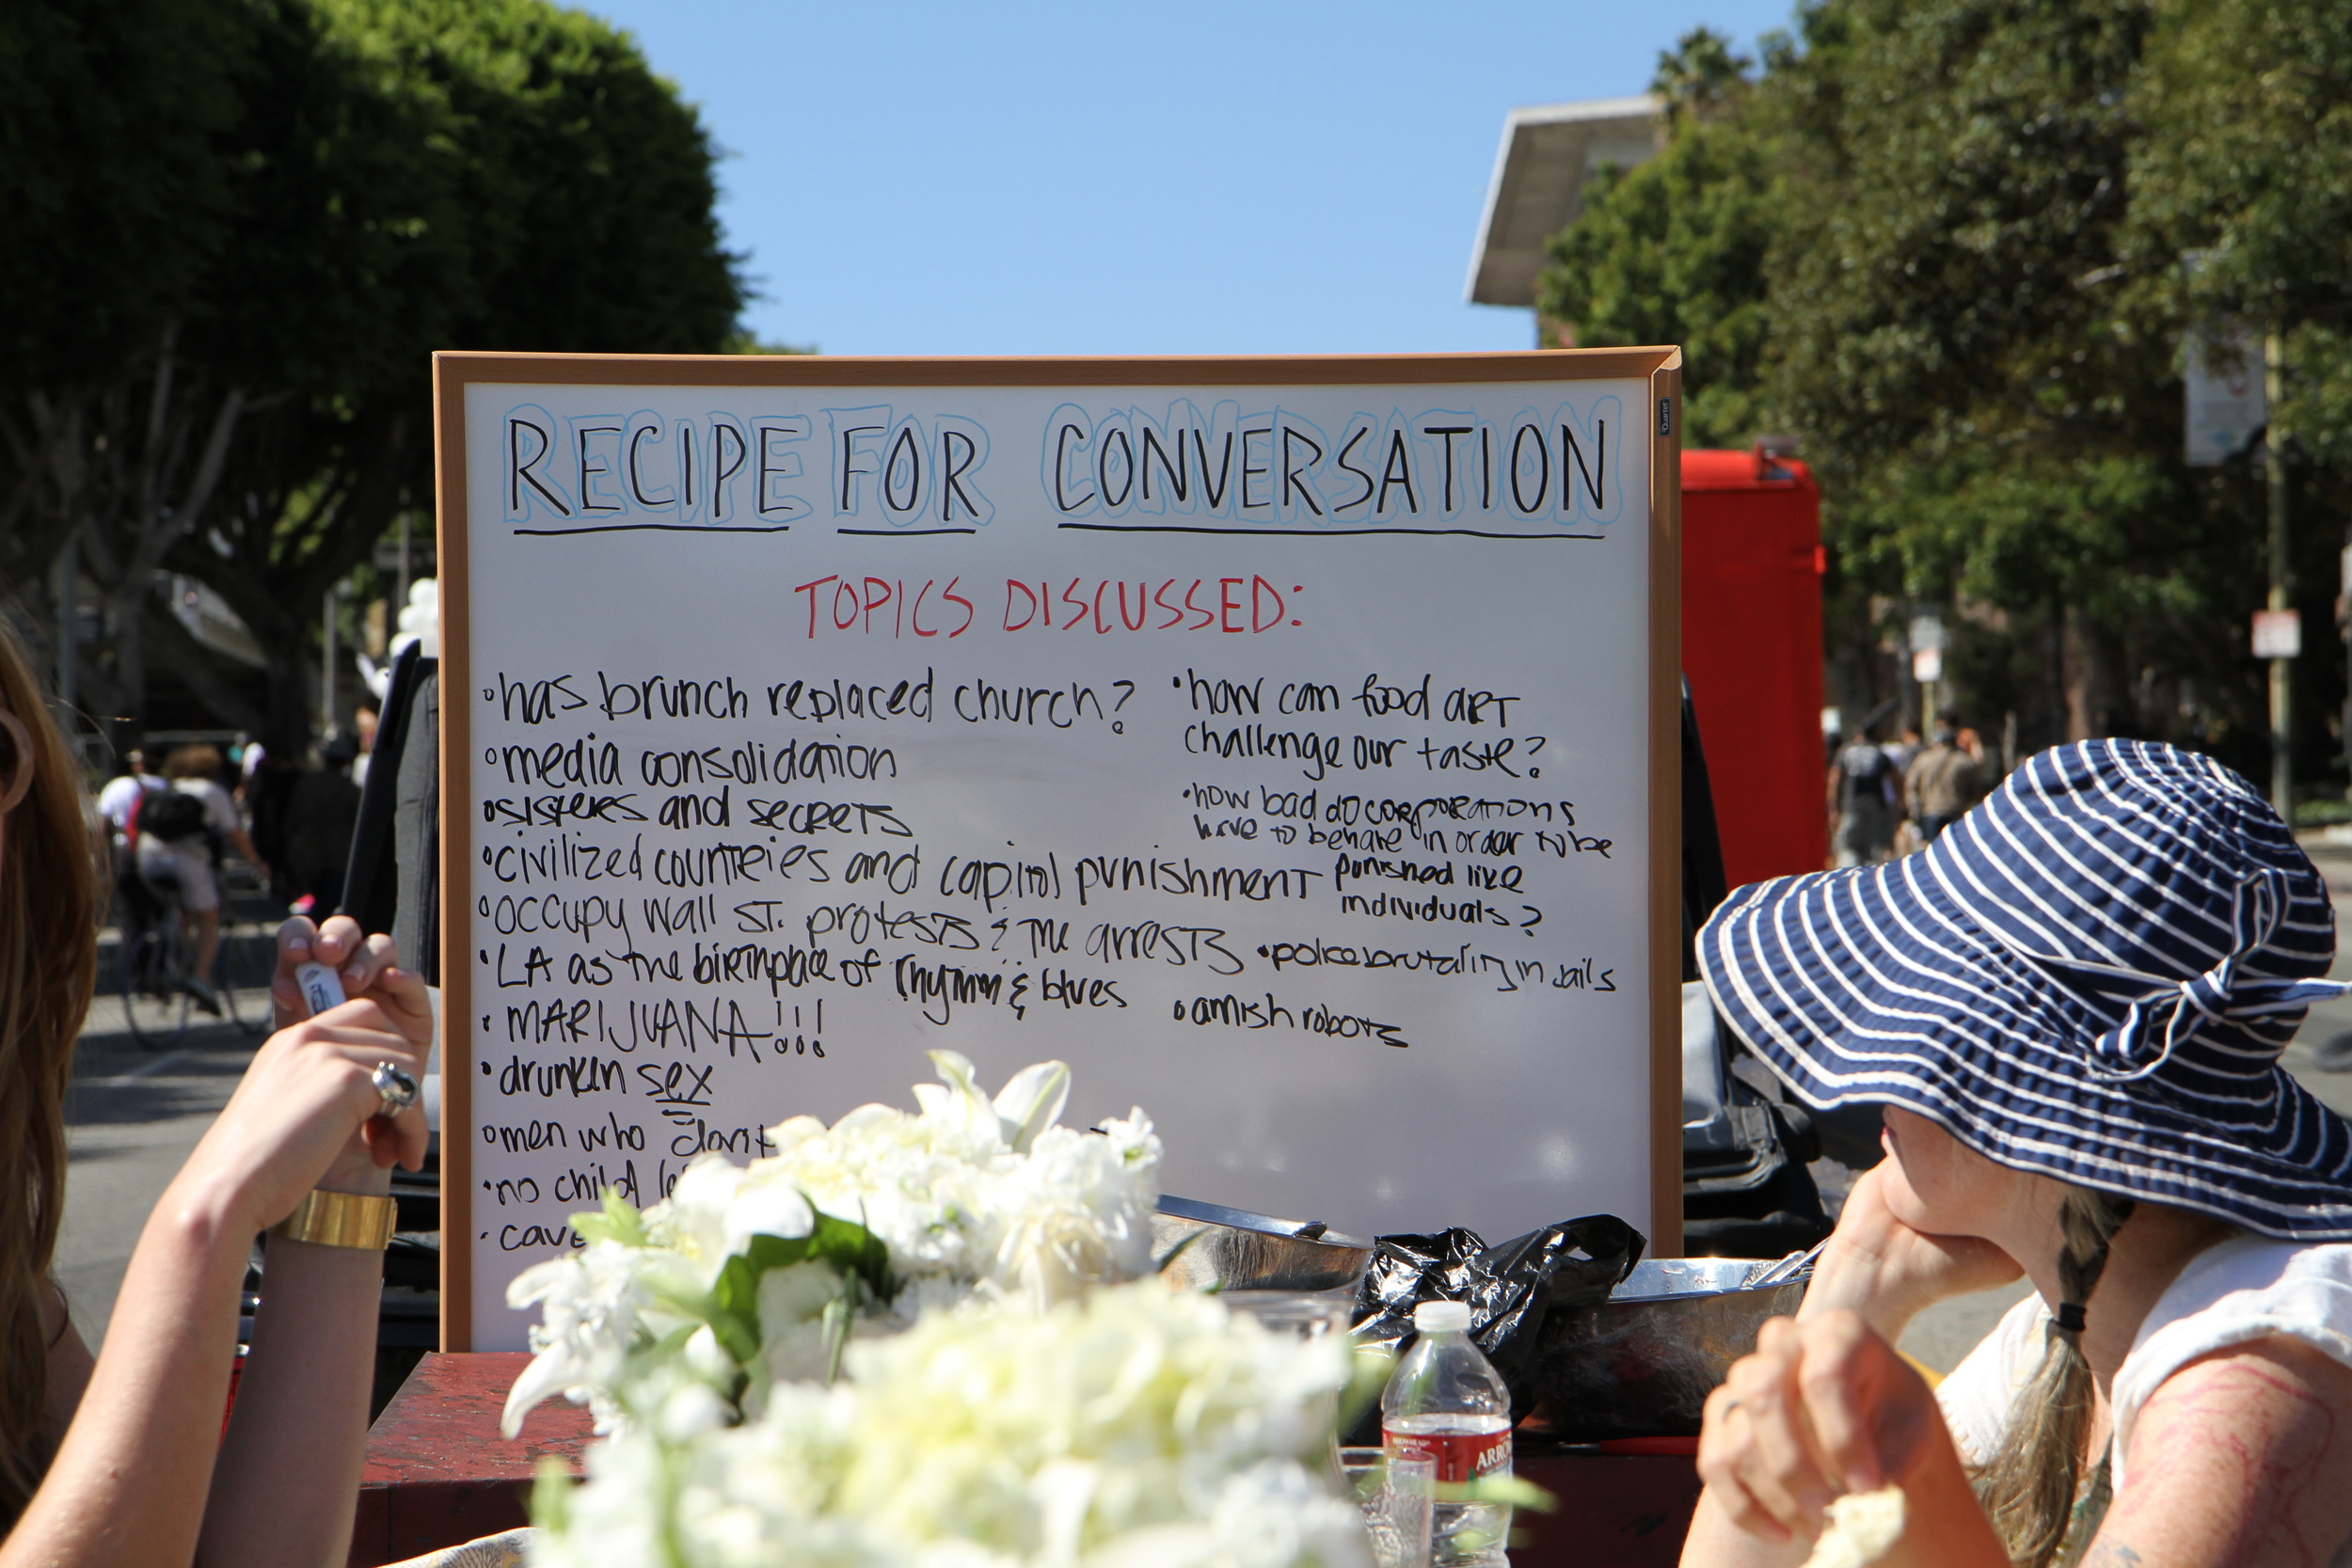   Recipe for Conversation  Documentation of Performance Duration 2:30 hours Downtown Los Angeles, October 2, 2011 Photo Courtesy of Tyler Calkin 